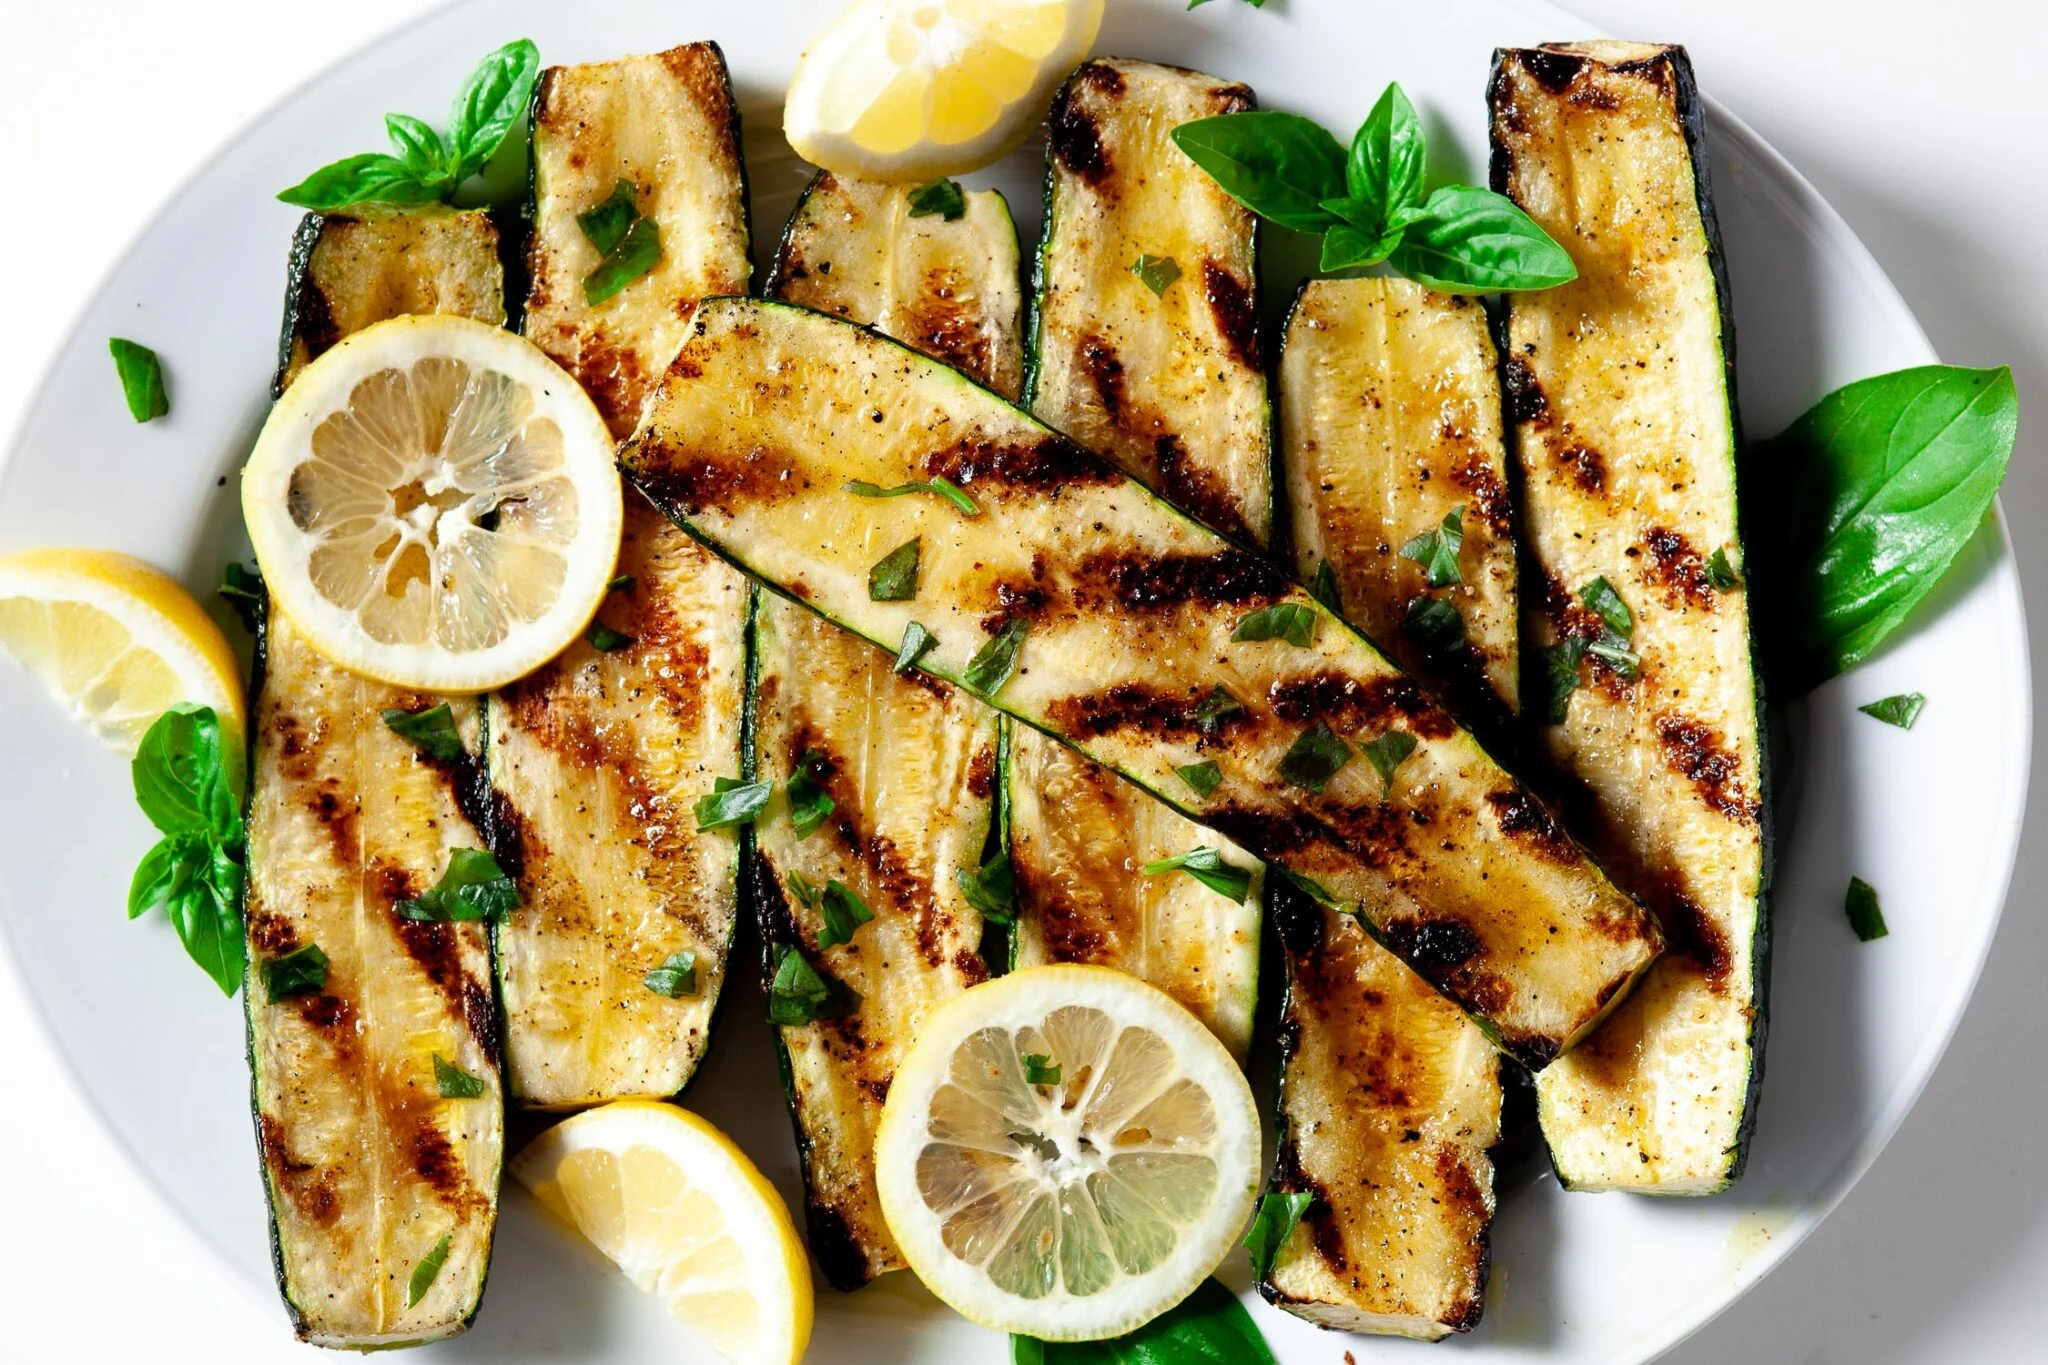 Grilled zuchini with parsley and lemon slices for a veggie side dish.